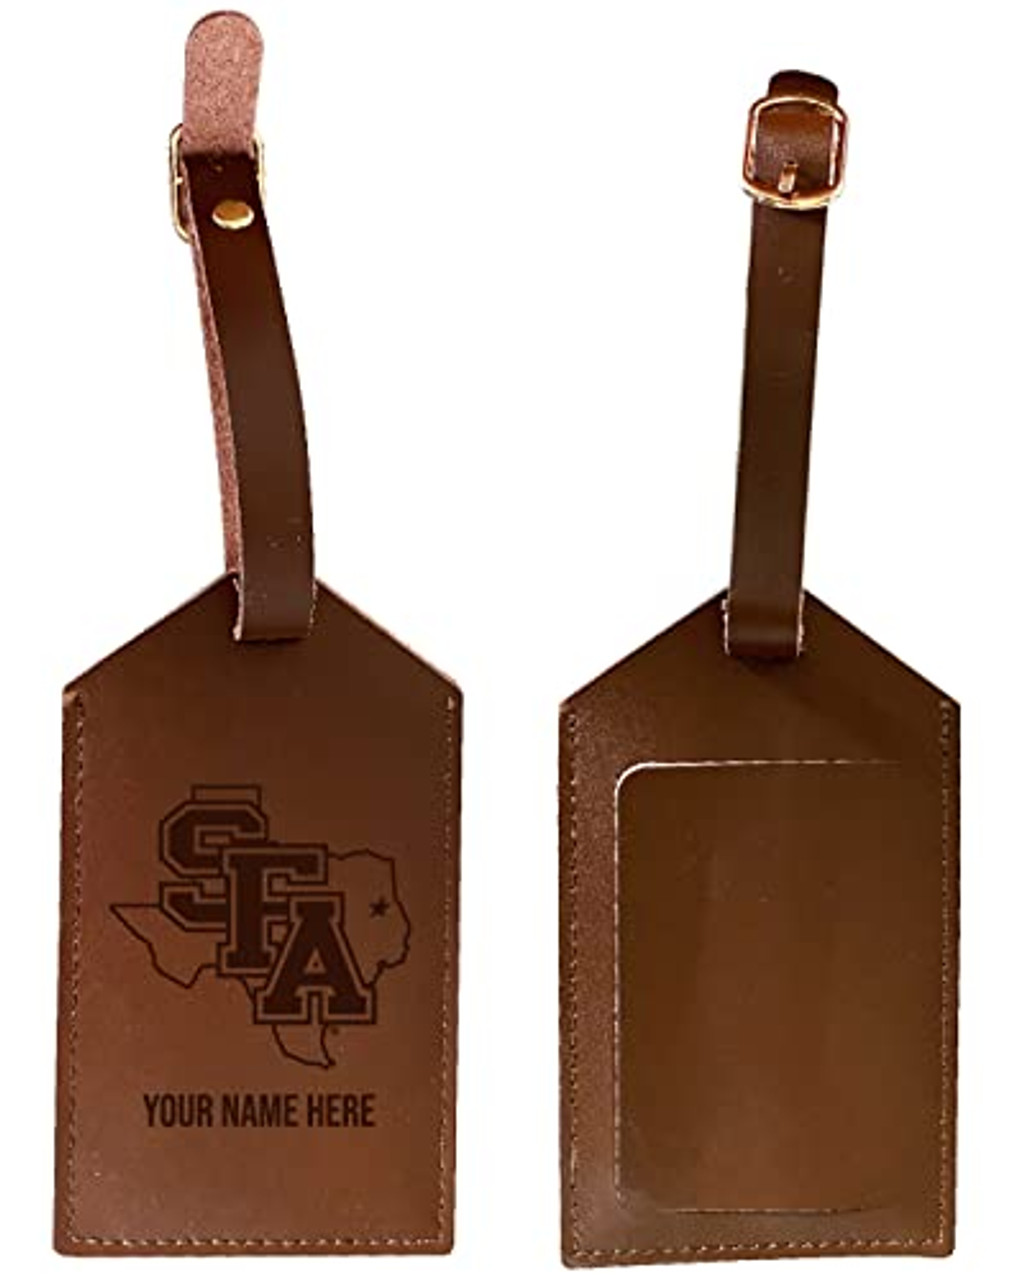 Personalized Customizable Stephen F. Austin State University Engraved Leather Luggage Tag with Custom Name